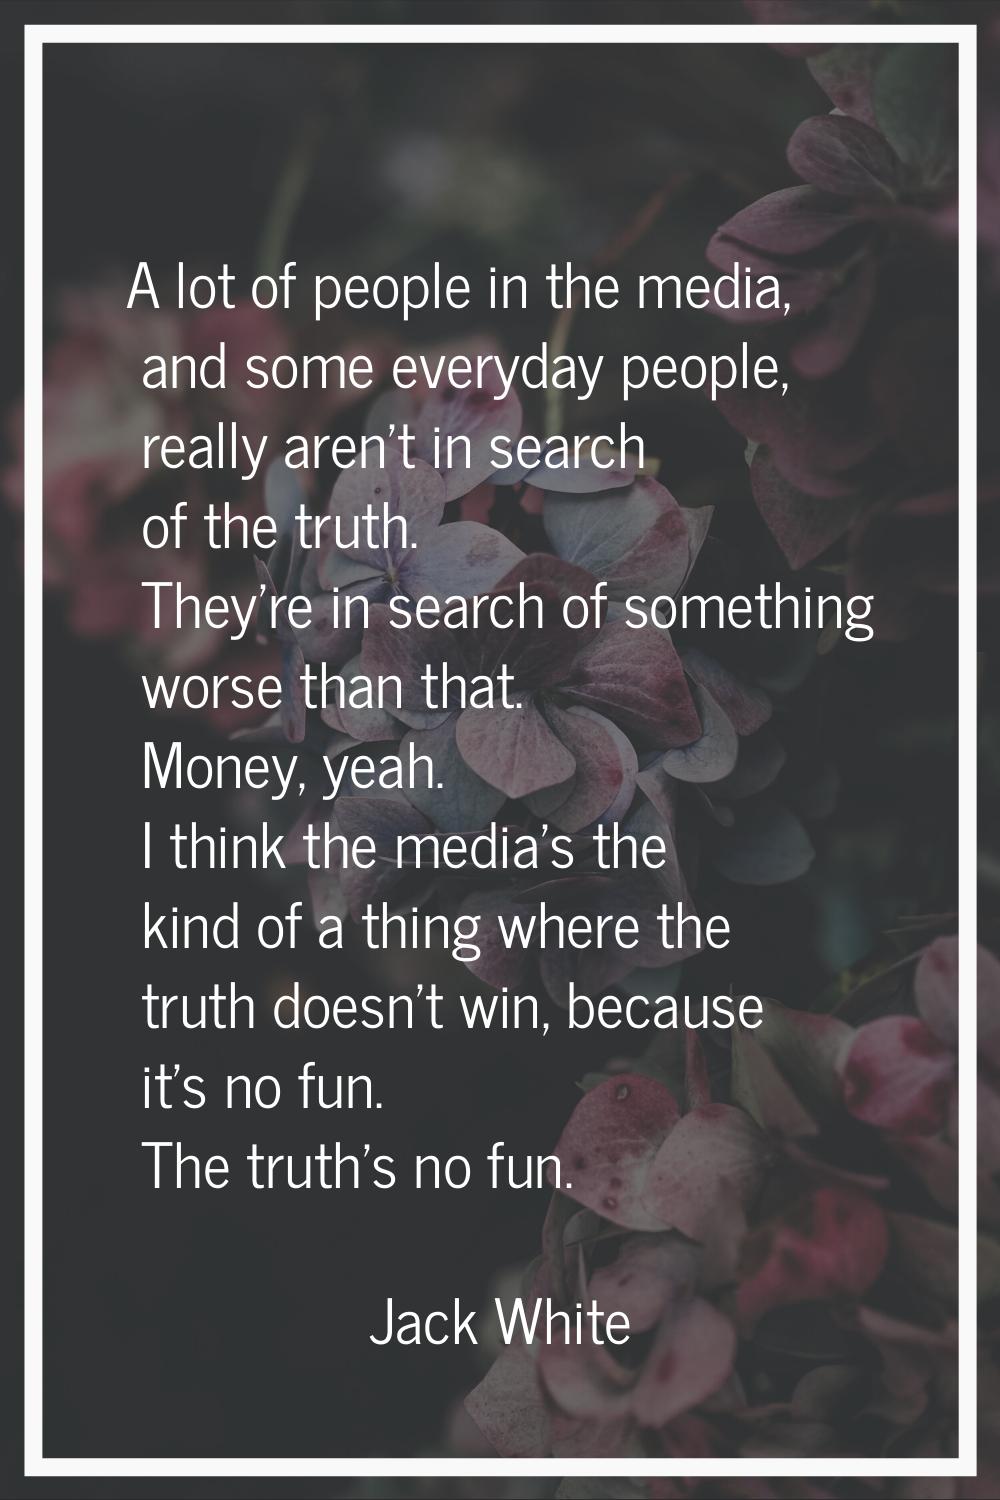 A lot of people in the media, and some everyday people, really aren't in search of the truth. They'